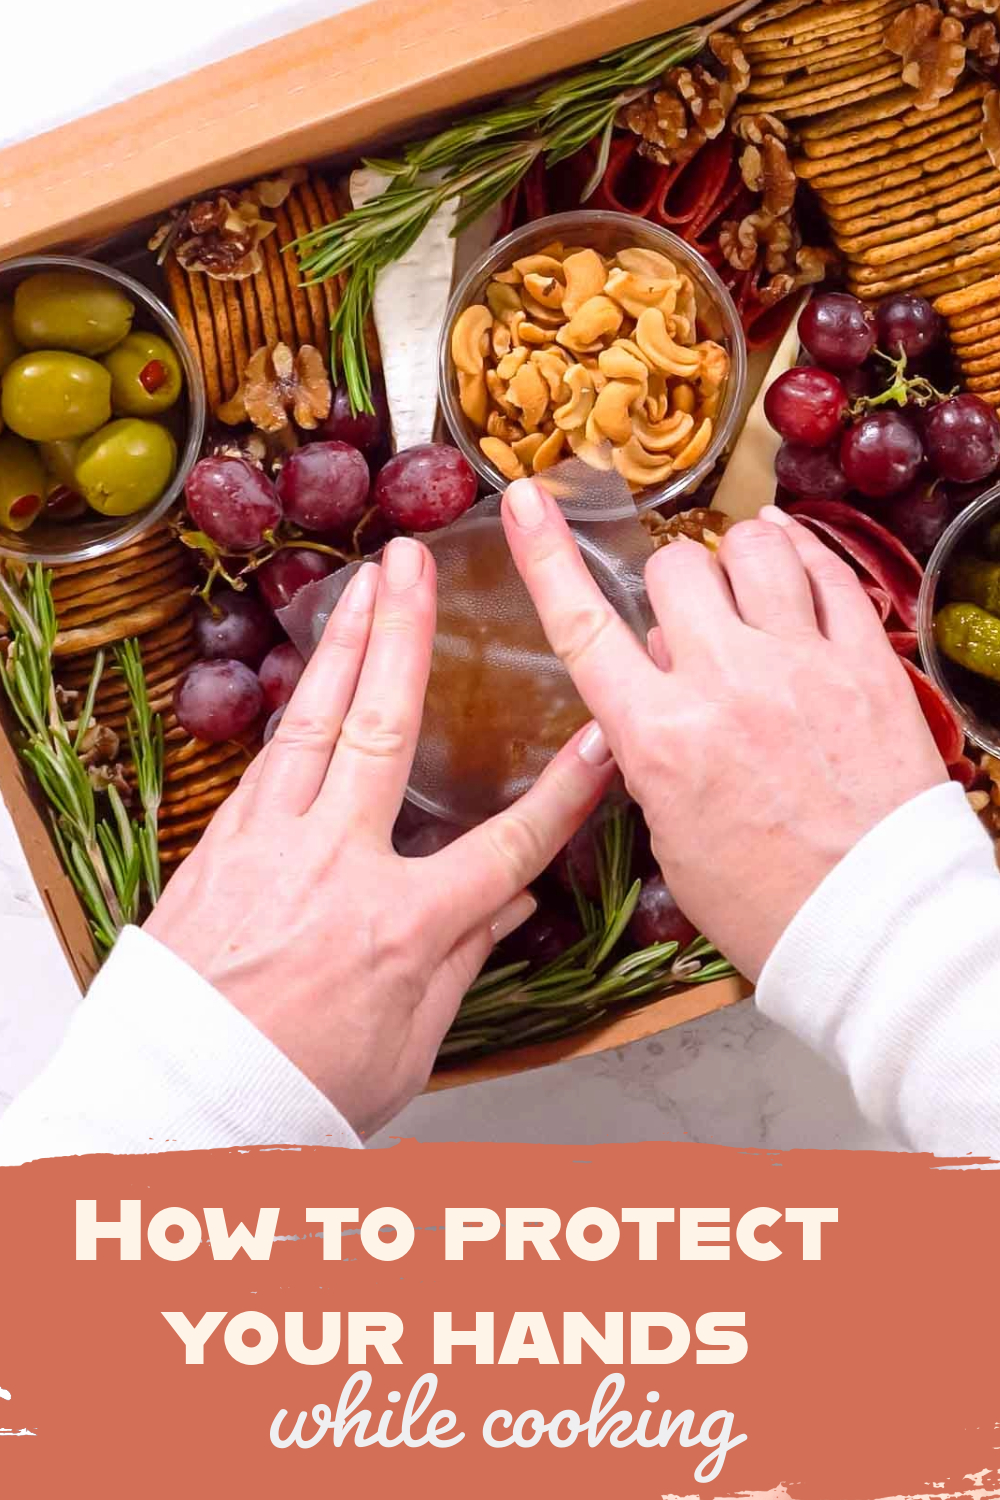 How to protect your hands while cooking